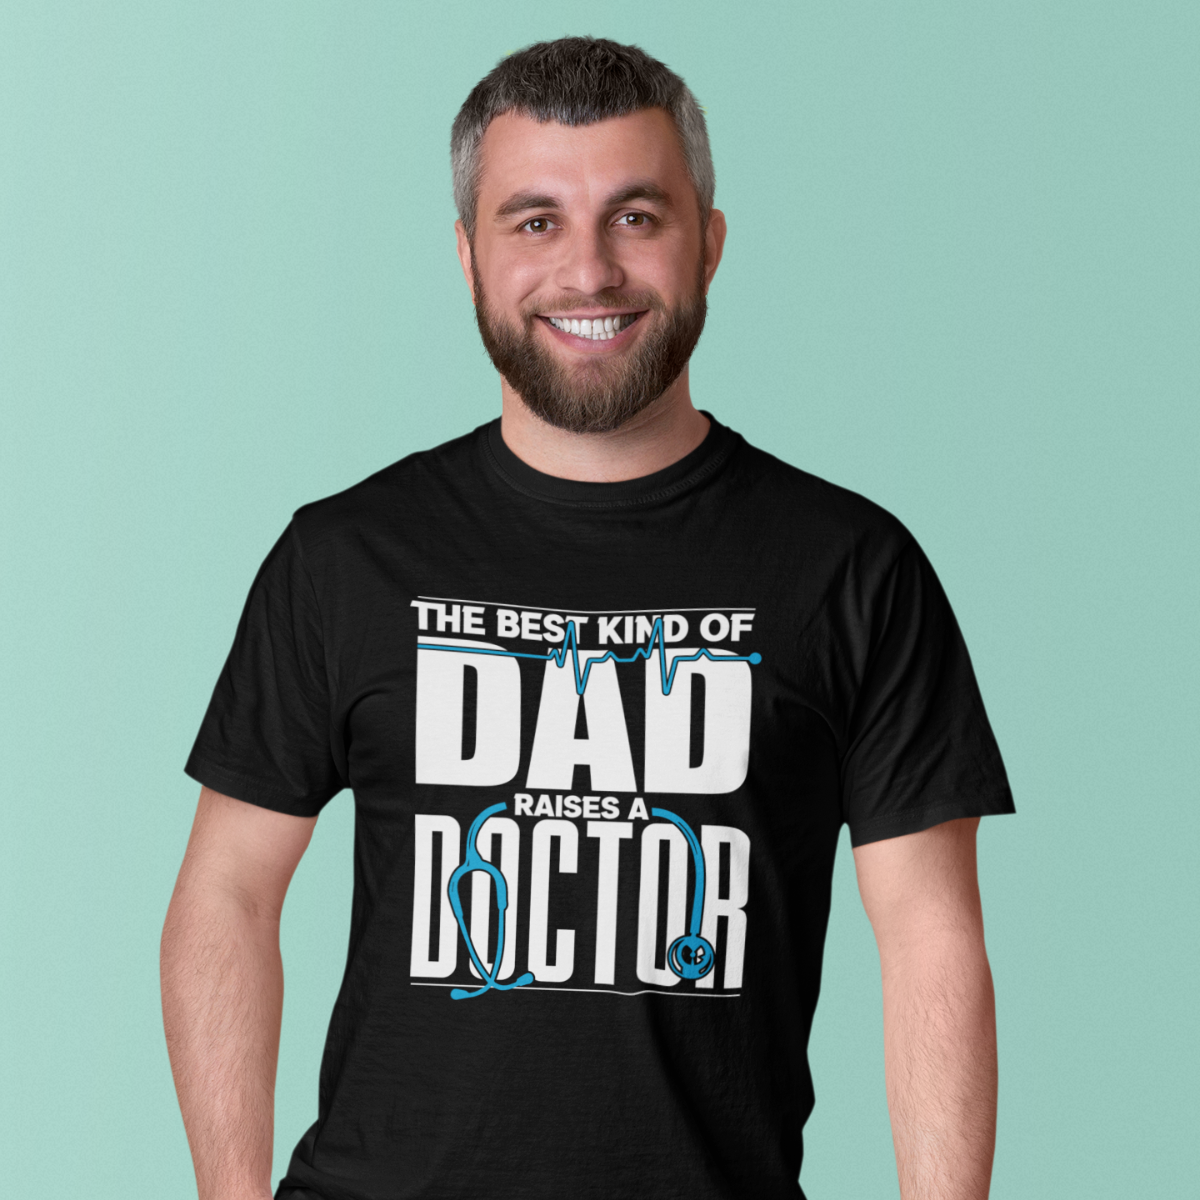 DAD - THE BEST KIND OF DAD RAISES A DOCTOR